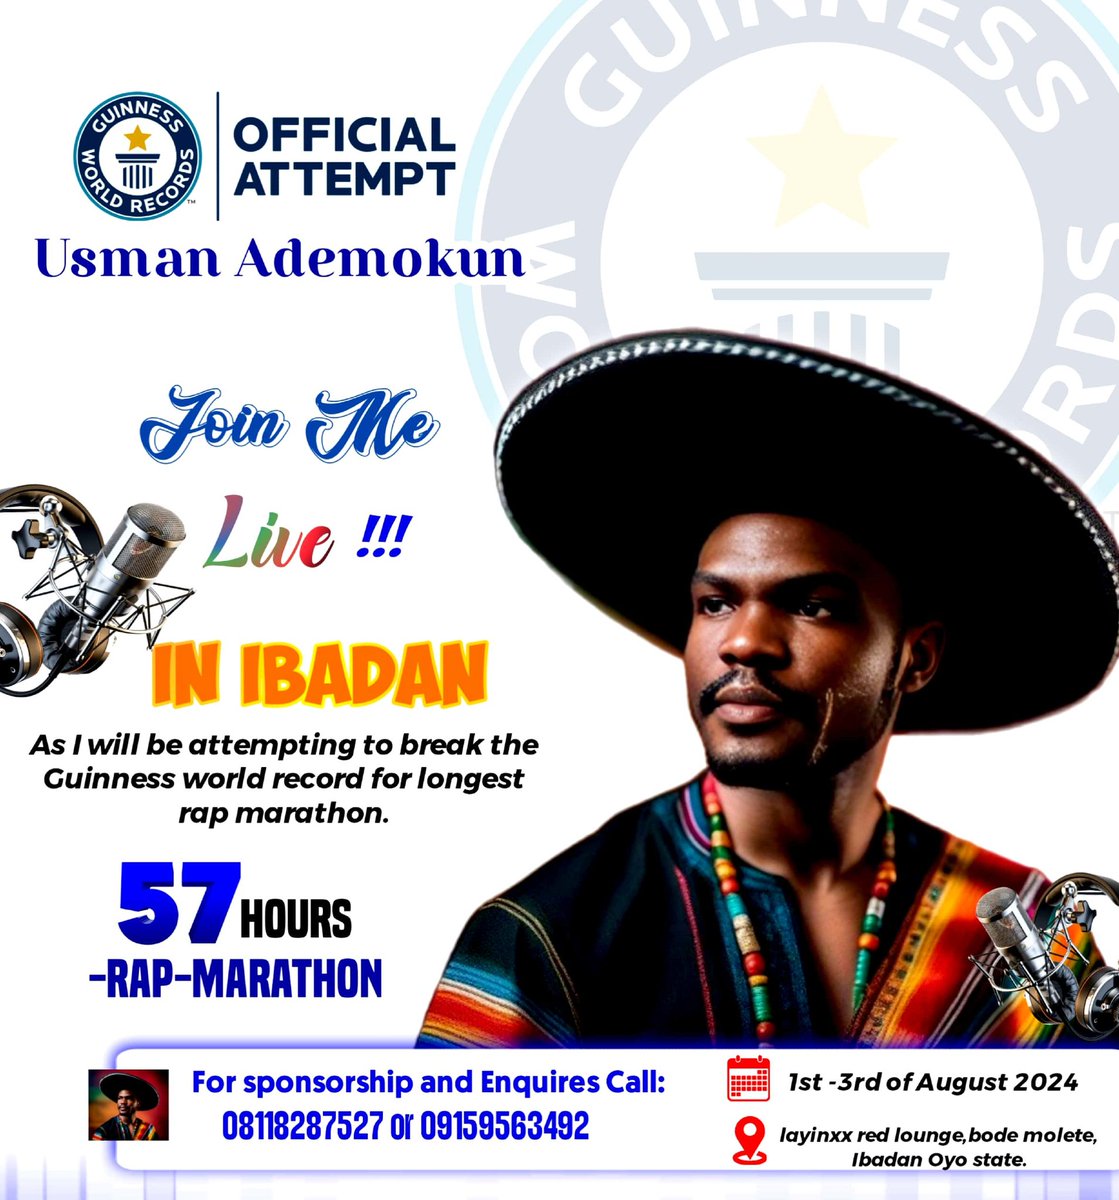 I believe in dreams becoming reality.on the 1st of August 2024,I will be attempting to break the Guinness world record for longest rap freestyle marathon in the city of Ibadan.. please show support by reposting and retweeting .#Ibadantotheworld